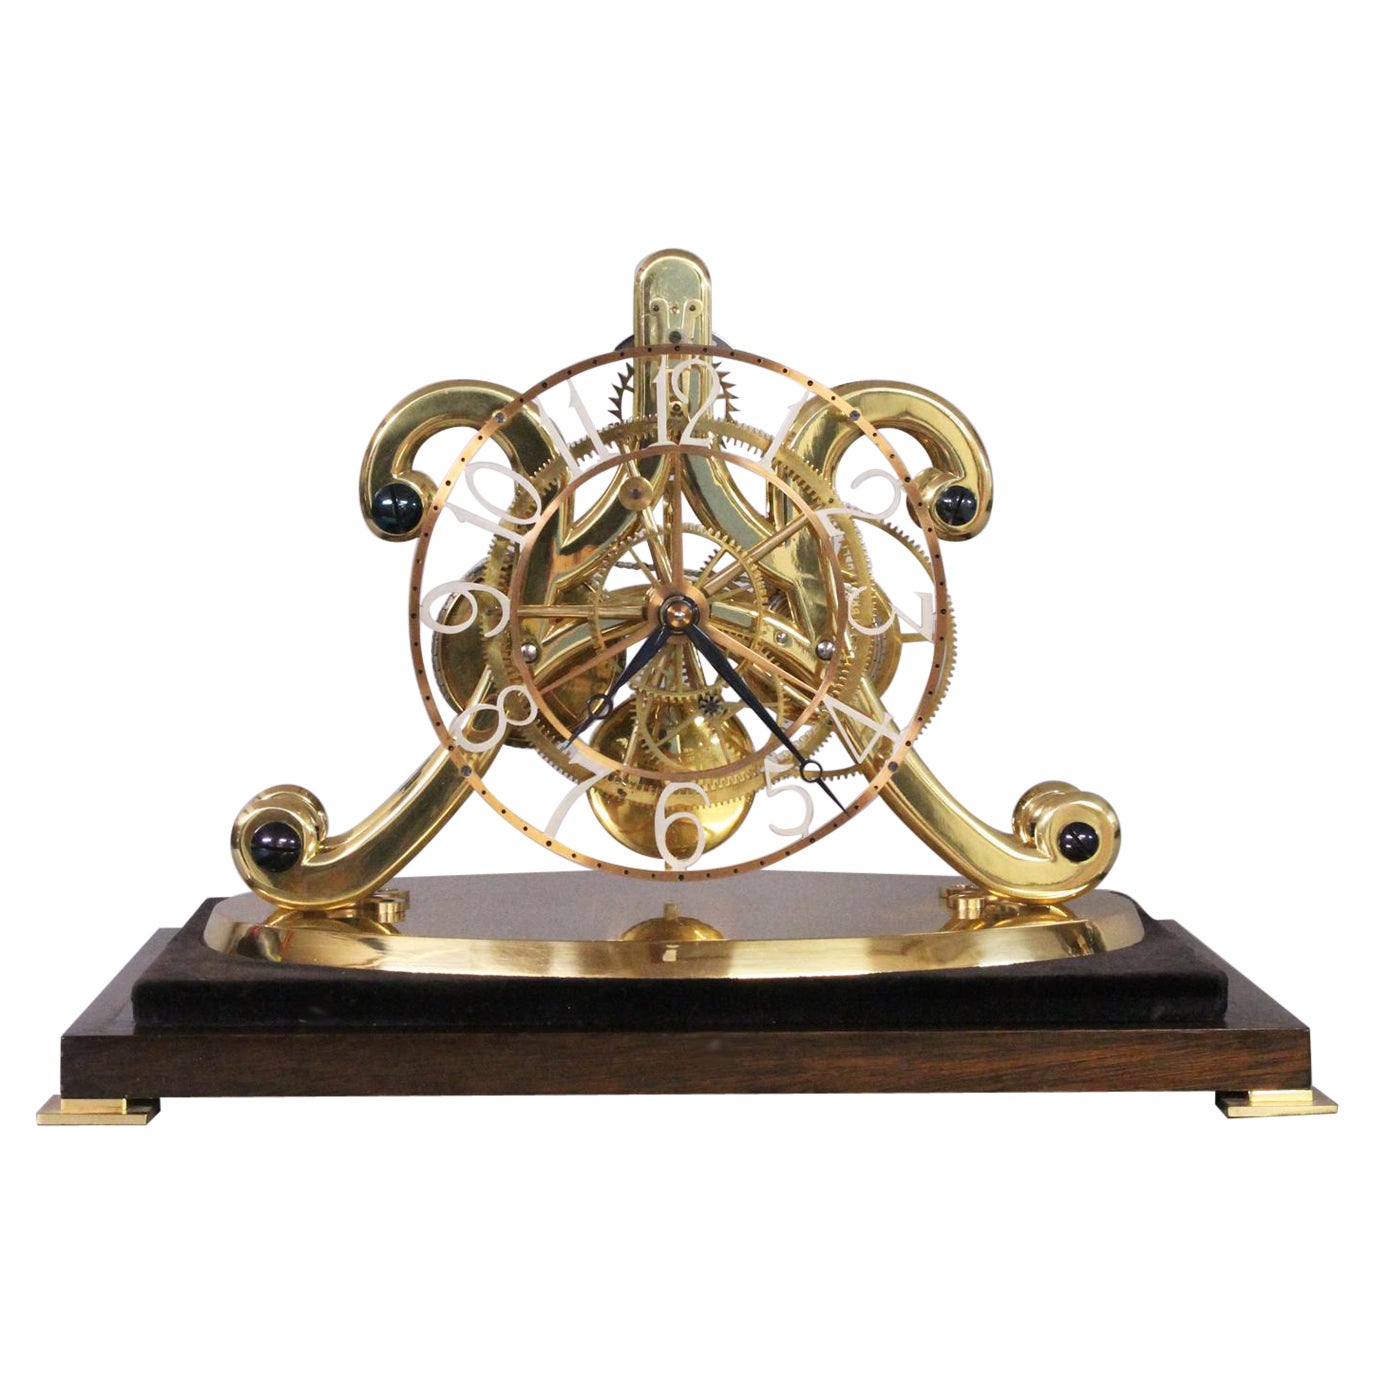 c. 1973 Replica of a Strutt Epicyclic Skeleton Clock by Dent For Sale